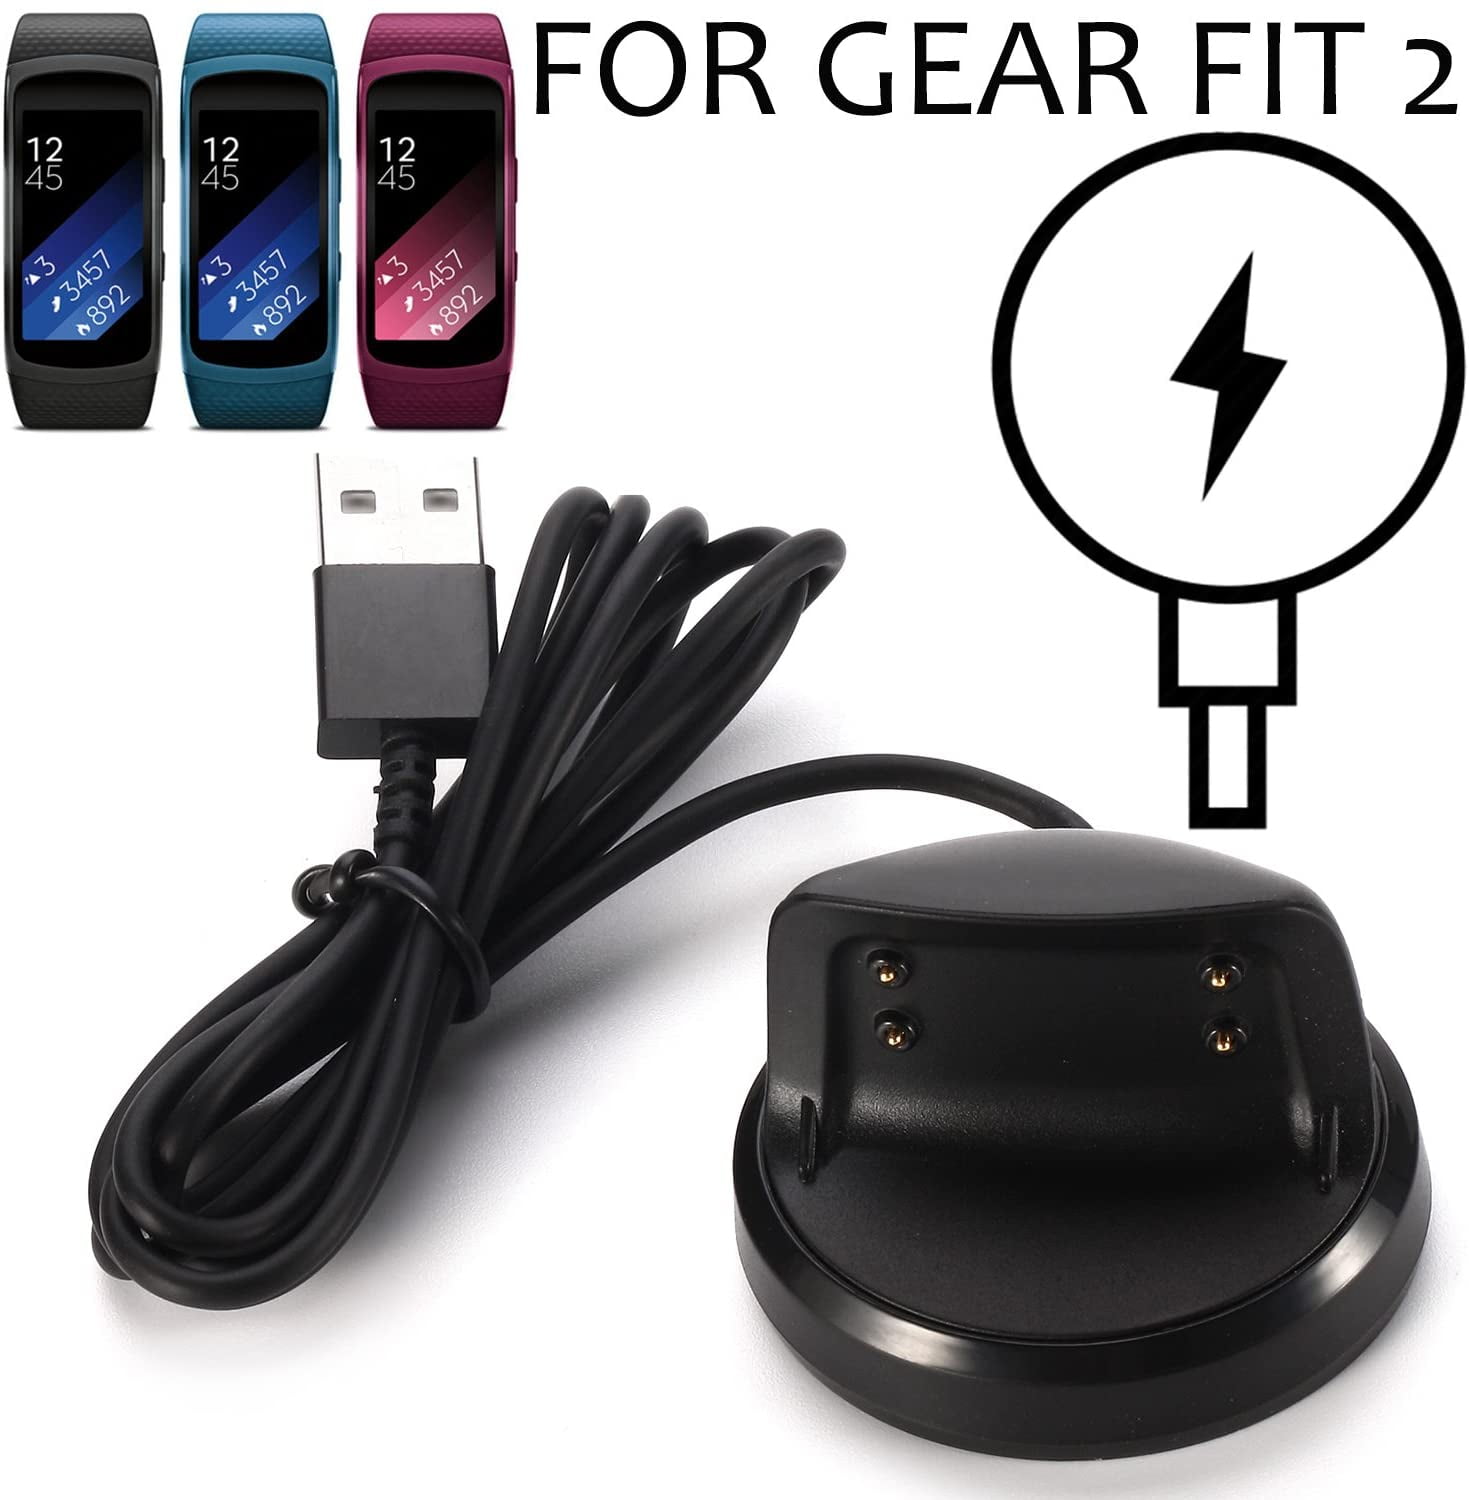 gear fit 2 charger walmart